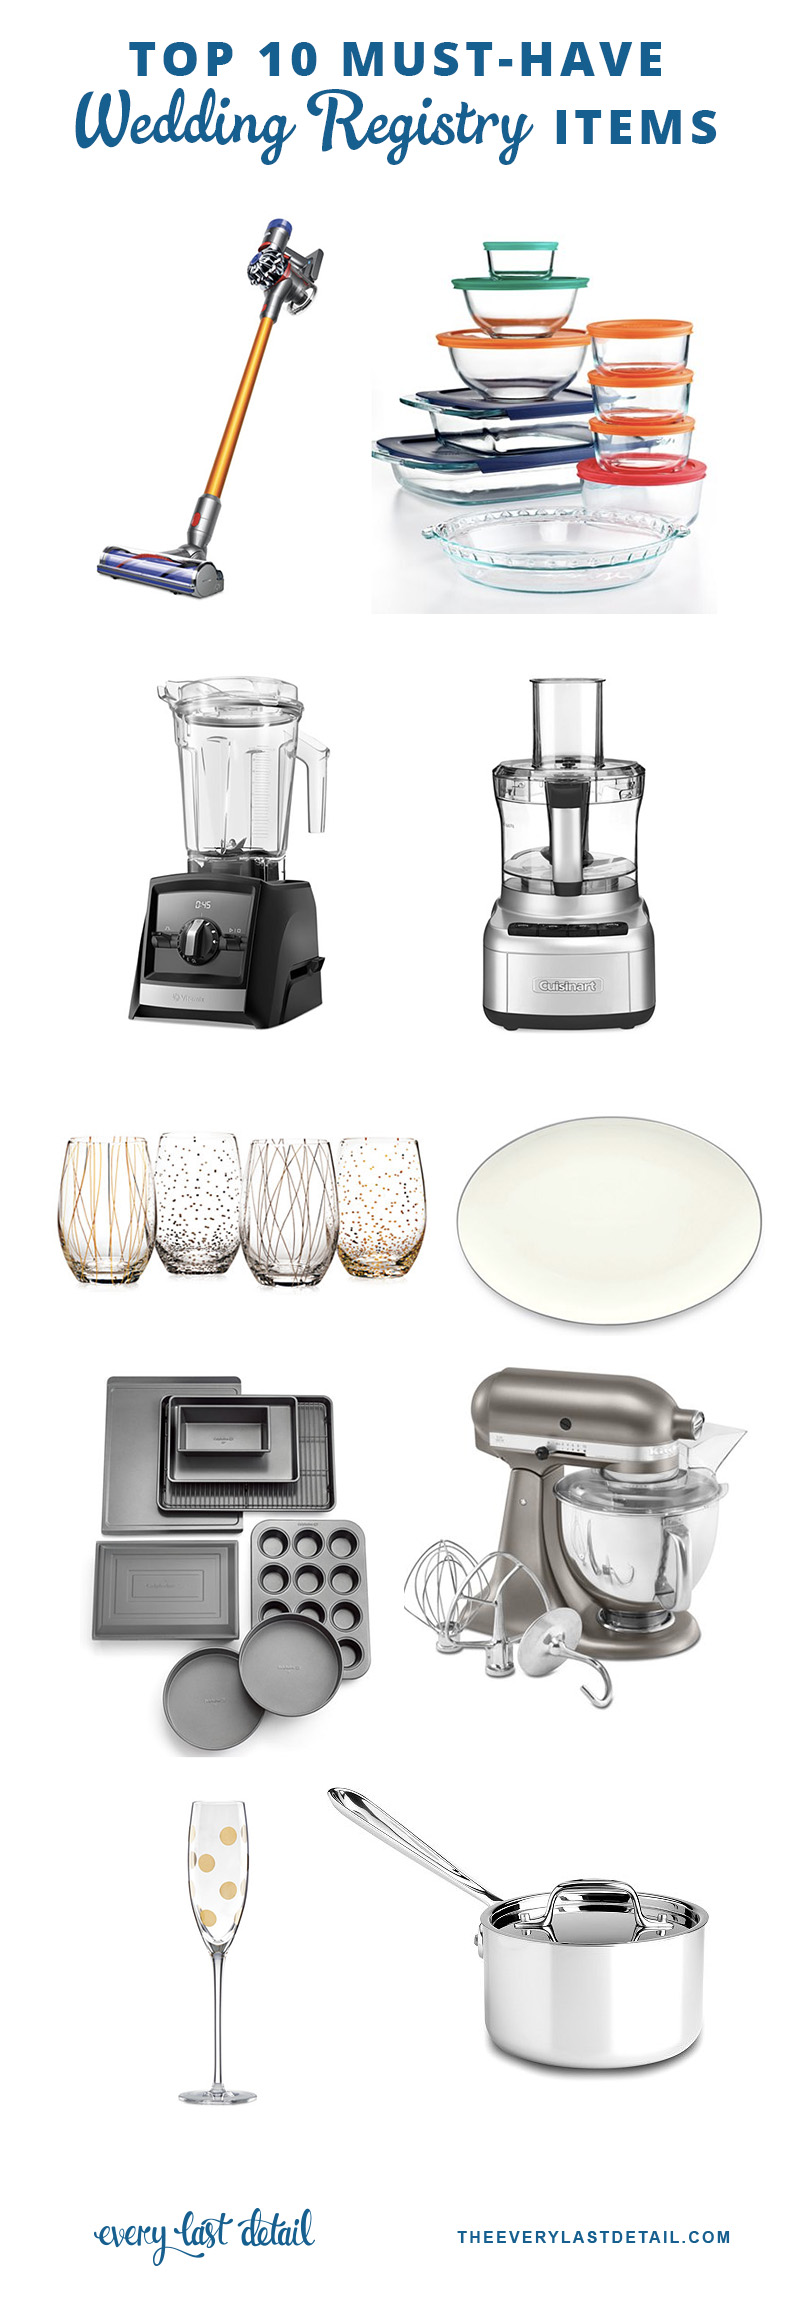 The Most Popular Wedding Registry Items in the U.S.